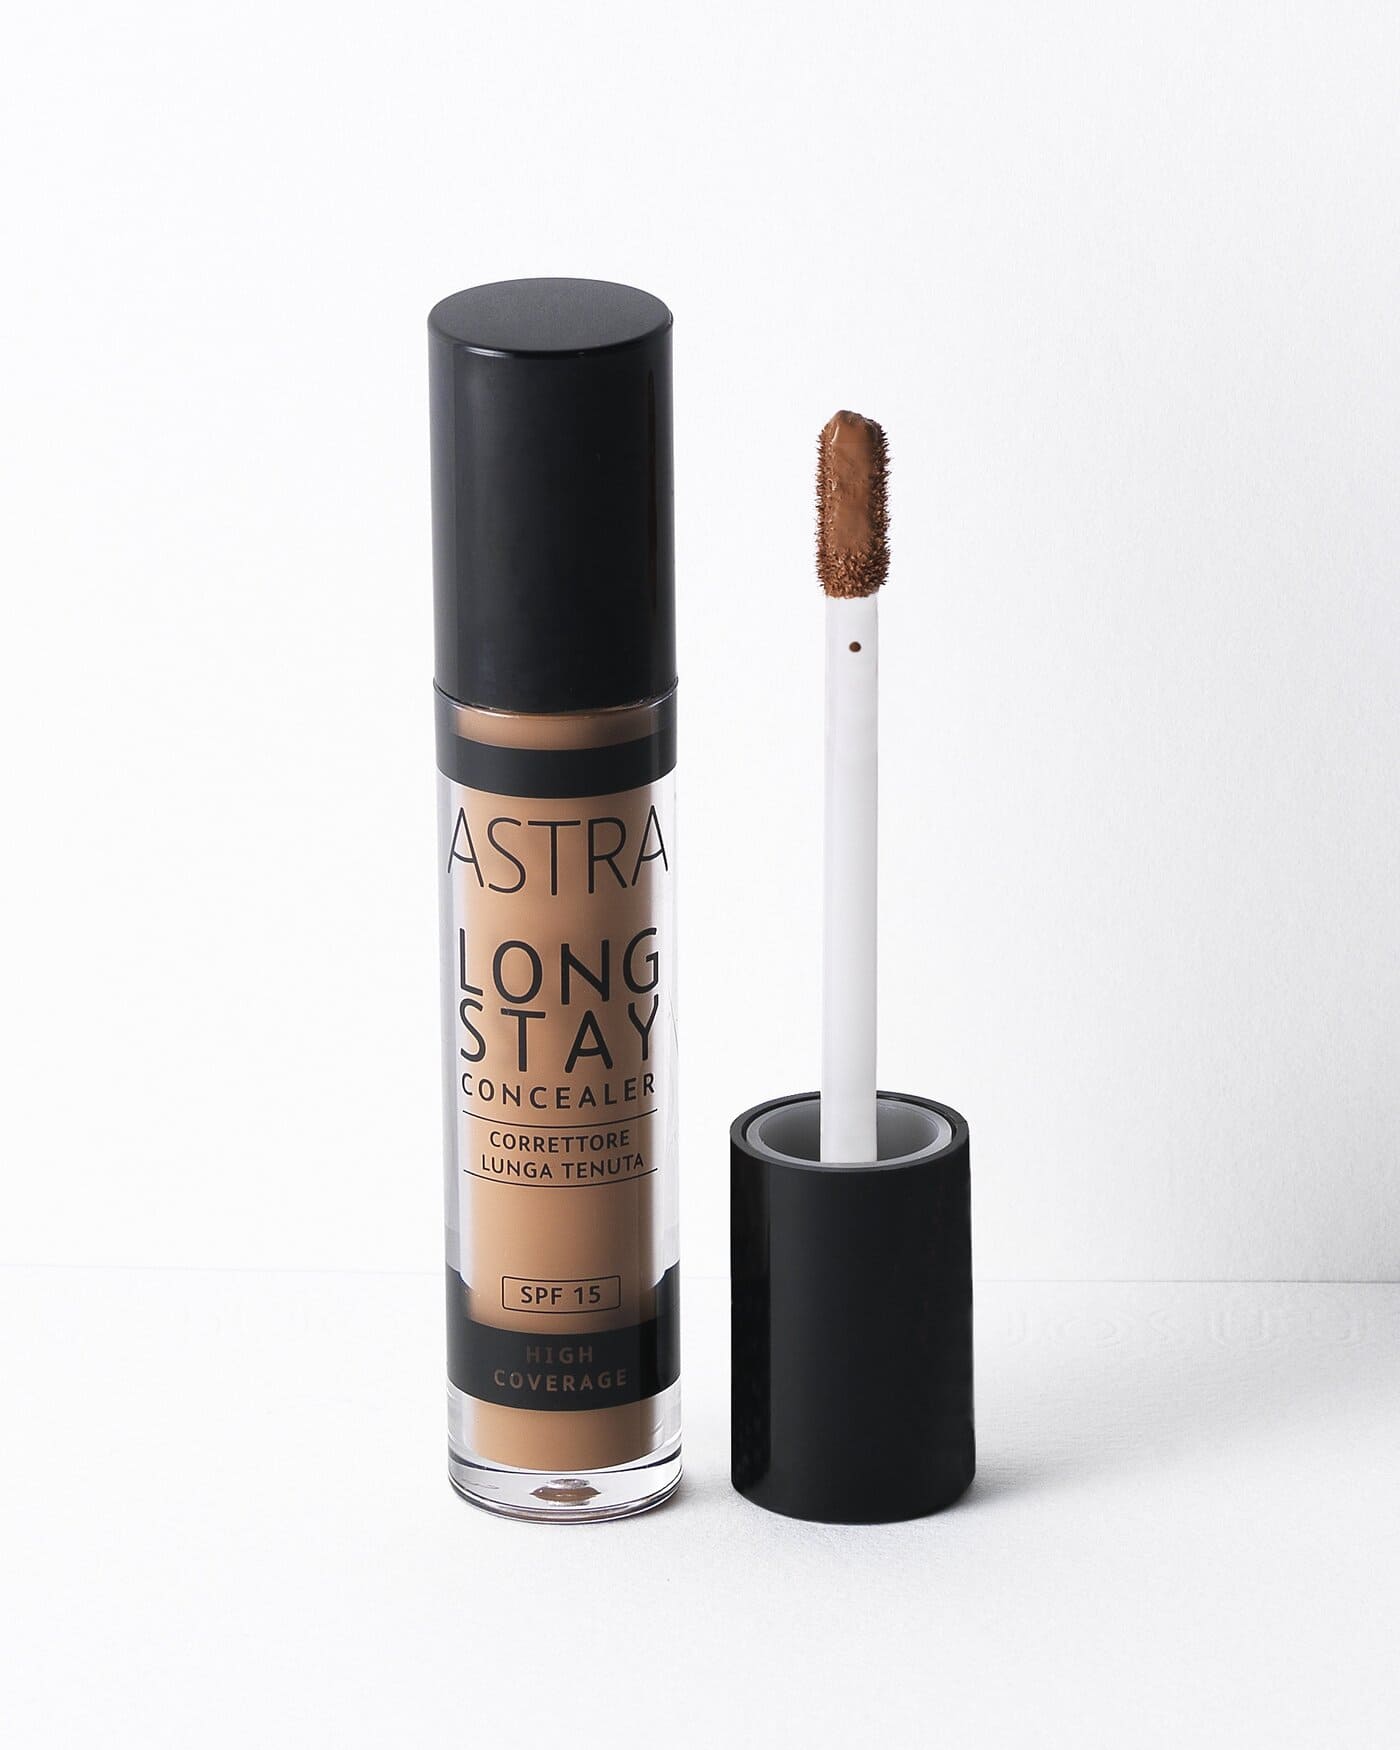 LONG STAY CONCEALER - Correttore Lunga Tenuta - 09W - Teddy - Astra Make-Up